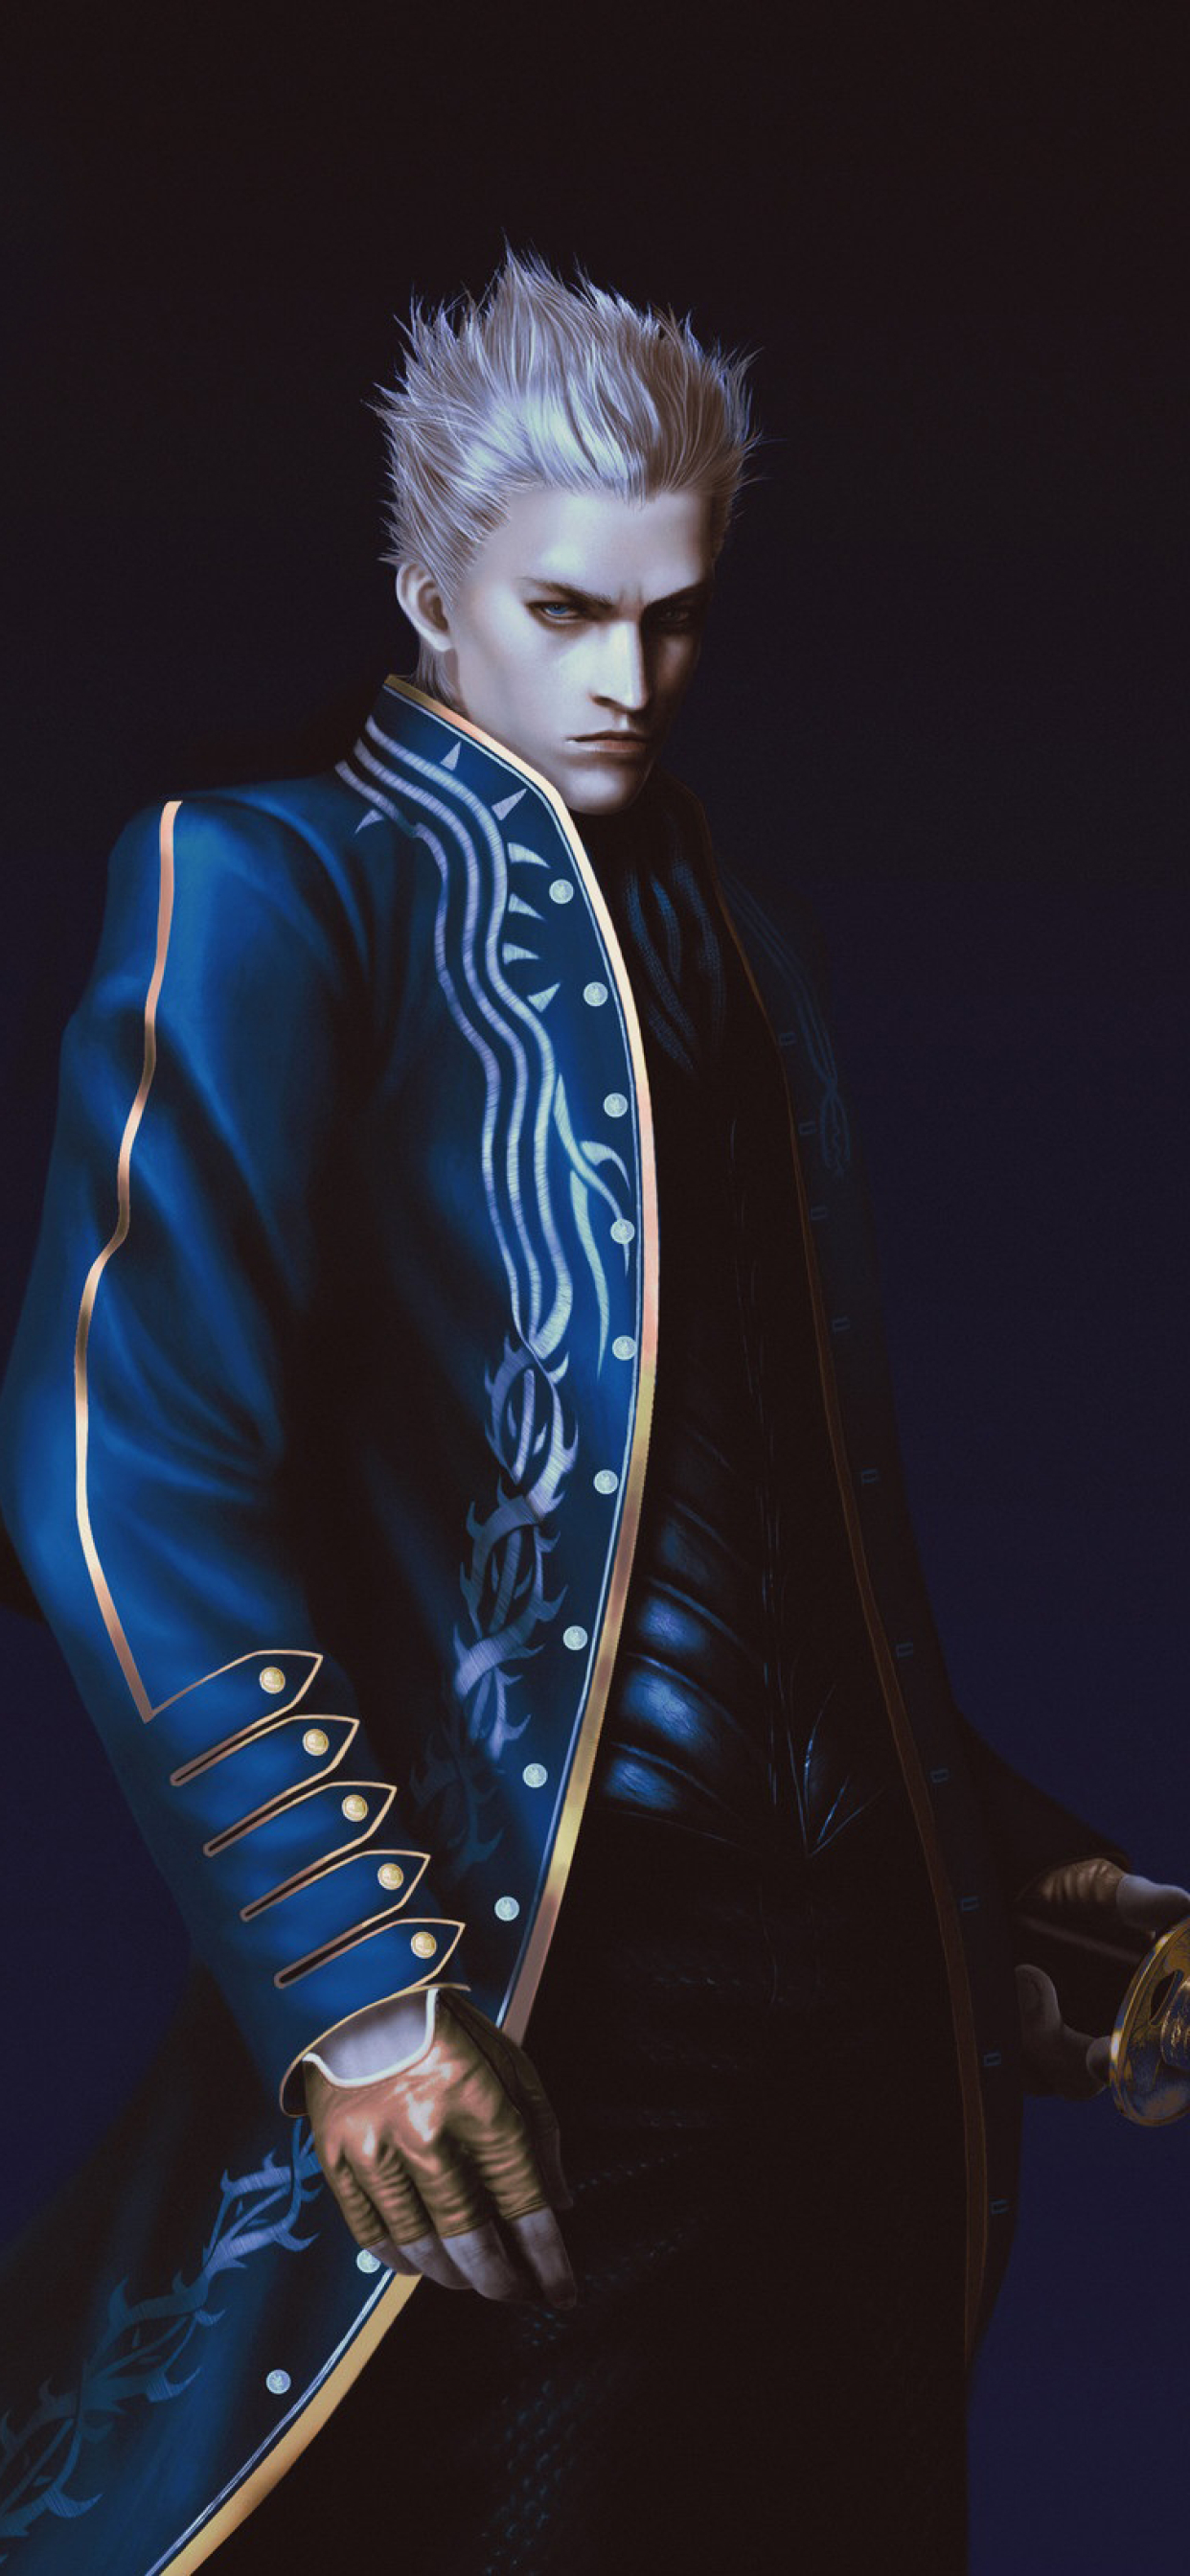 1242x26 Vergil Devil May Cry Iphone Xs Max Wallpaper Hd Games 4k Wallpapers Images Photos And Background Wallpapers Den